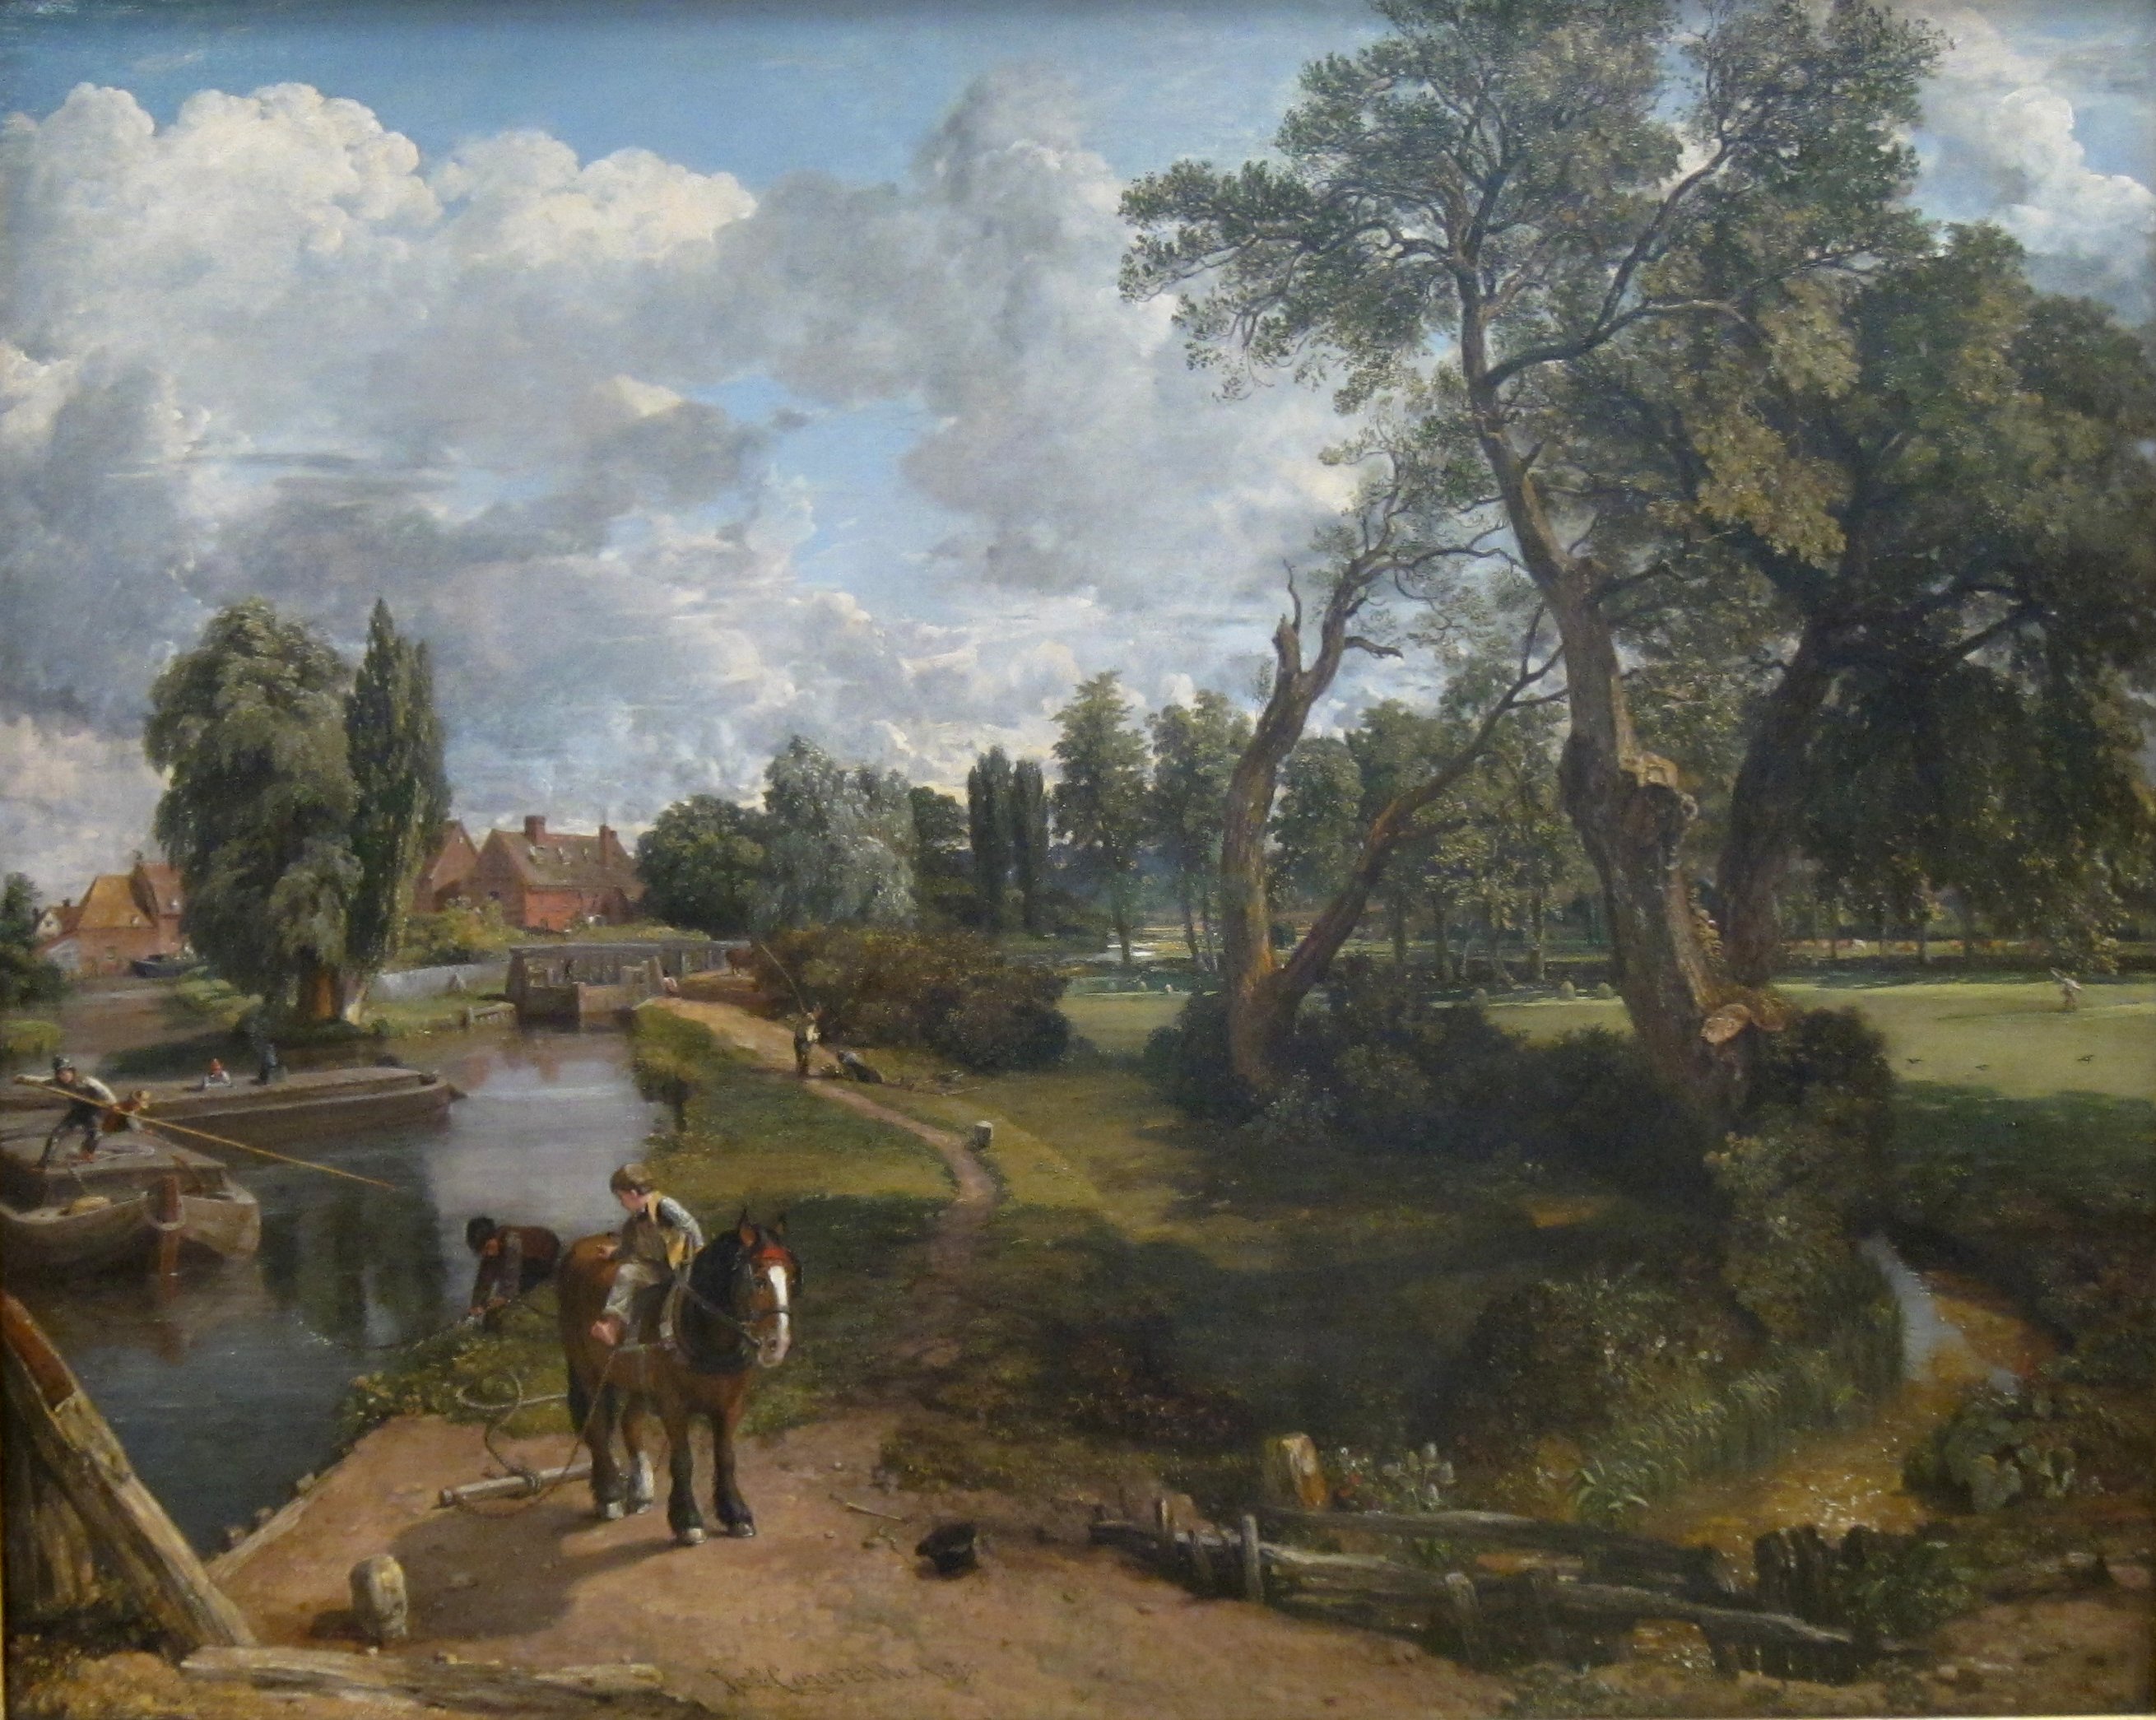 Flatford Mill (‘Scene on a Navigable River’) by John Constable - 1816-17 - 101.6 x 127 cm Tate Britain